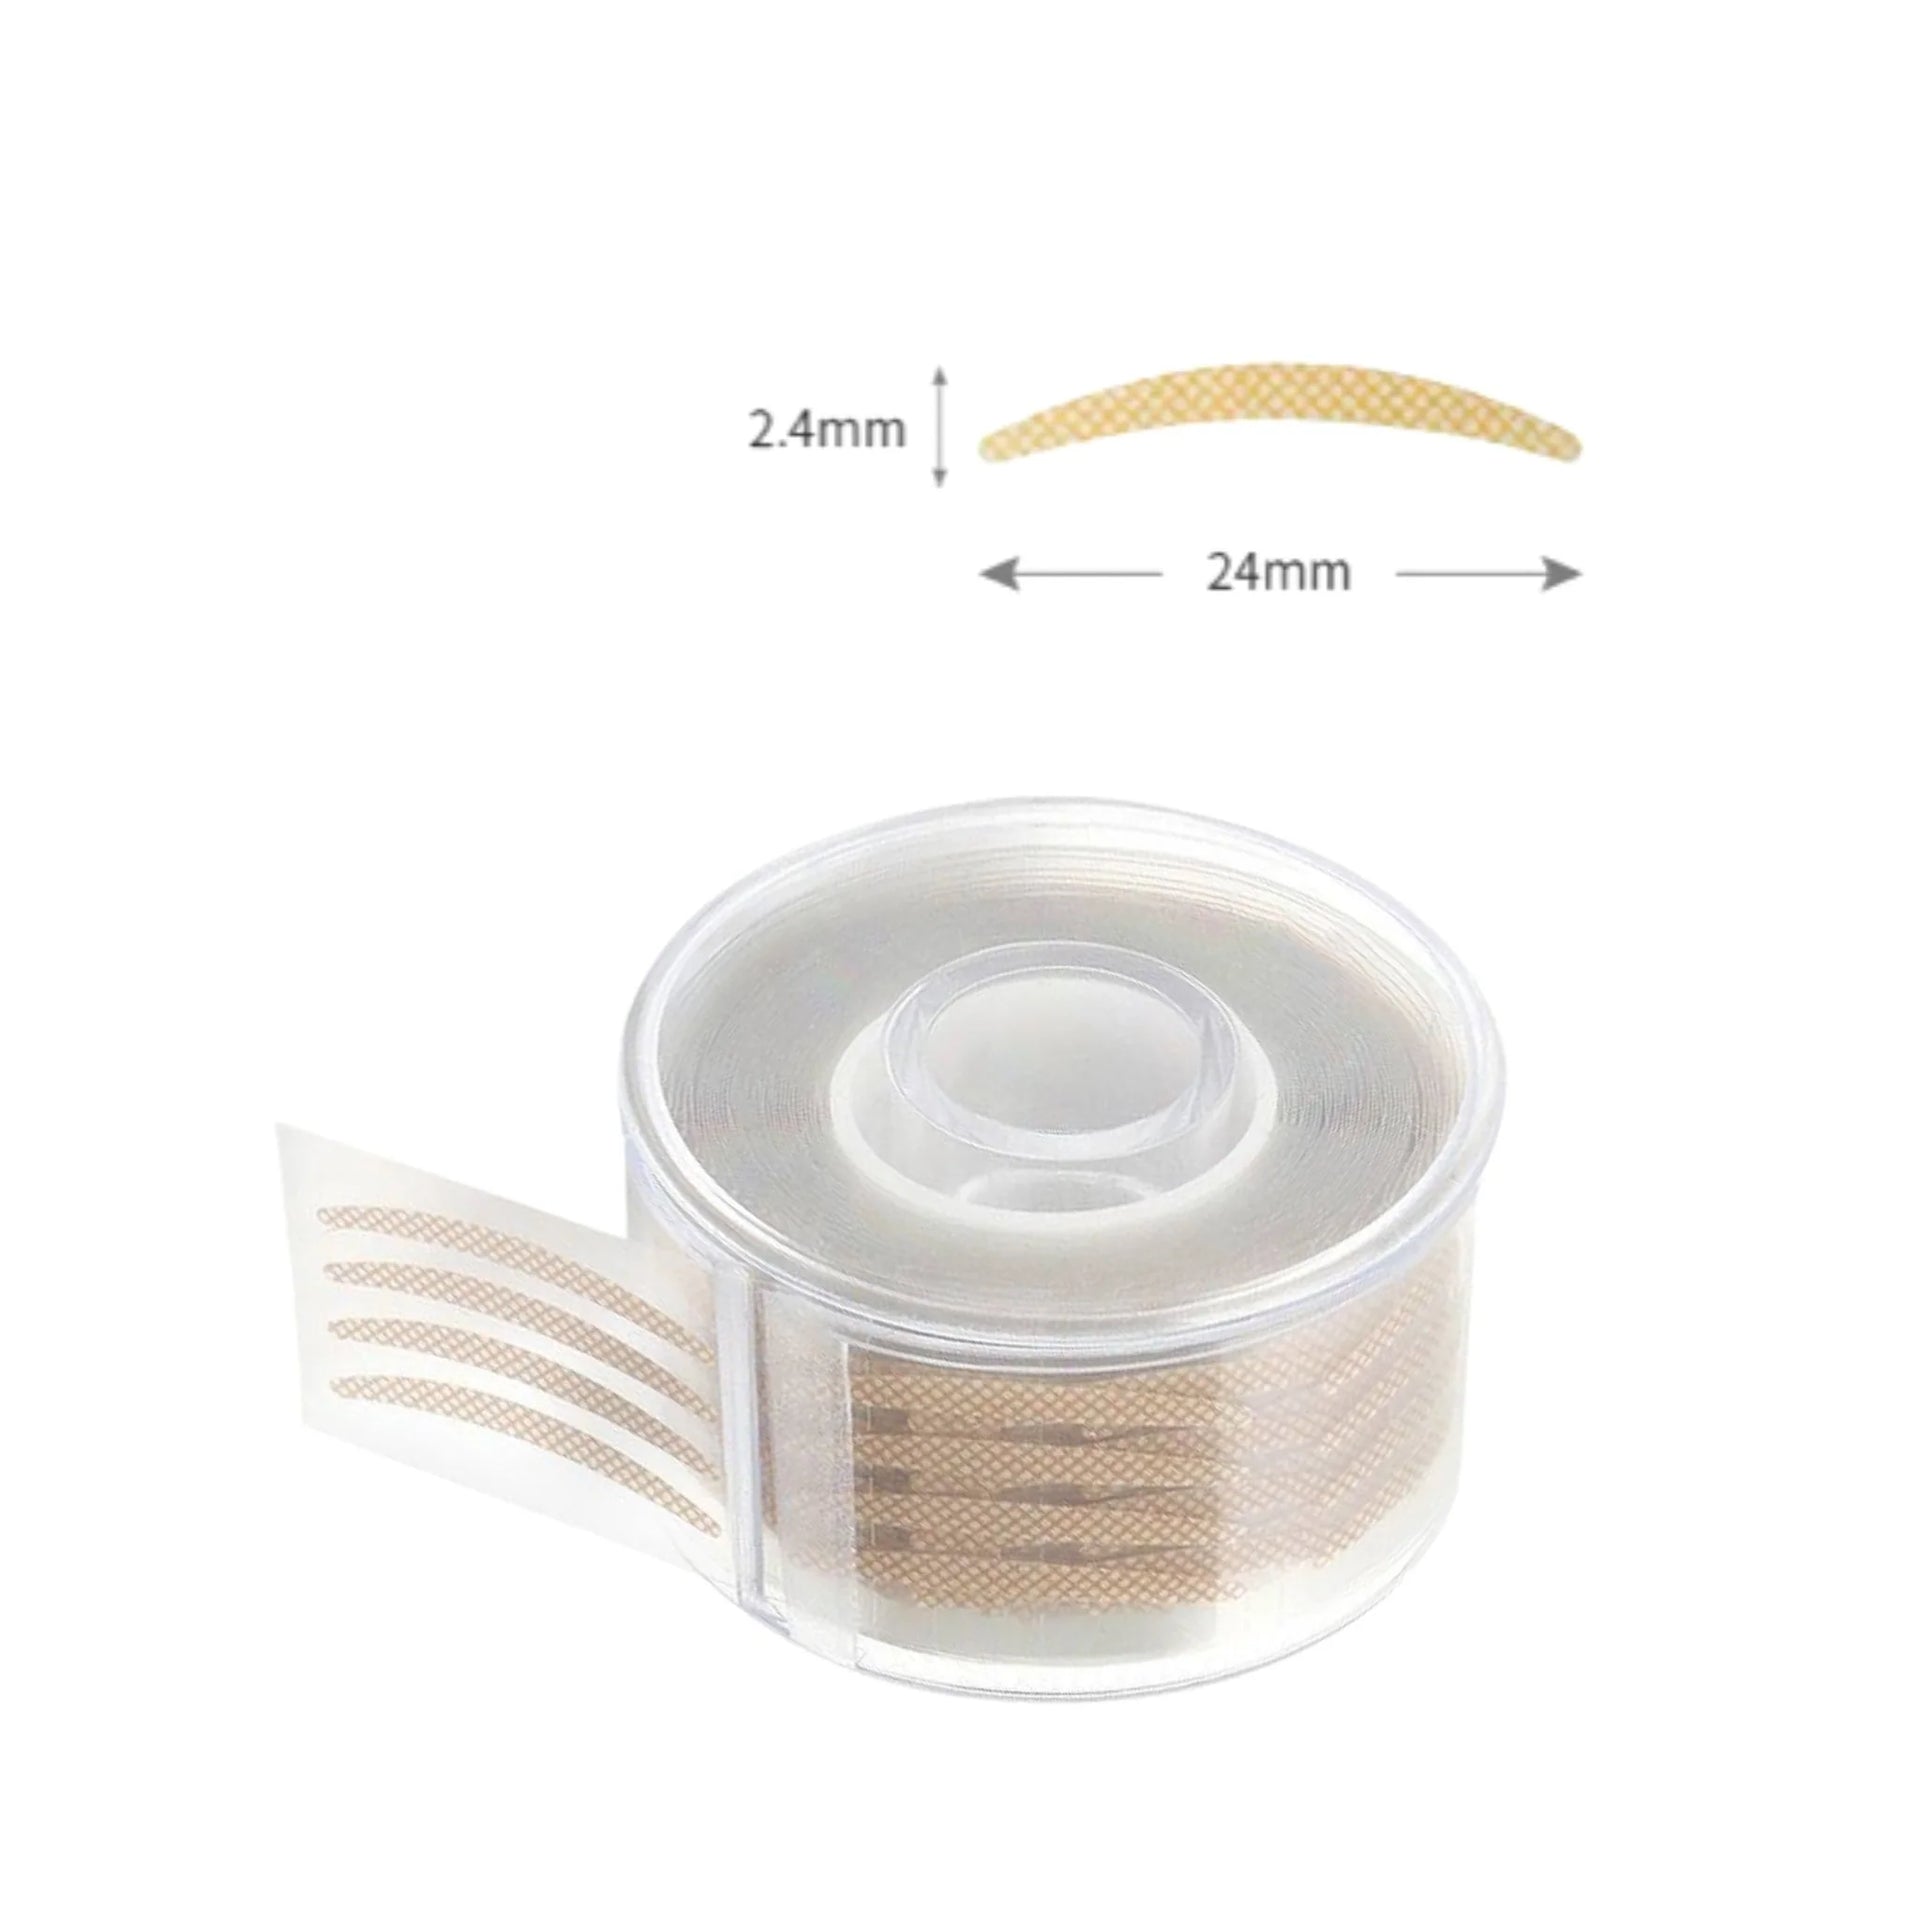 Eyelid Tape for Lash Extensions & Lash Lifts (1 ROLL)